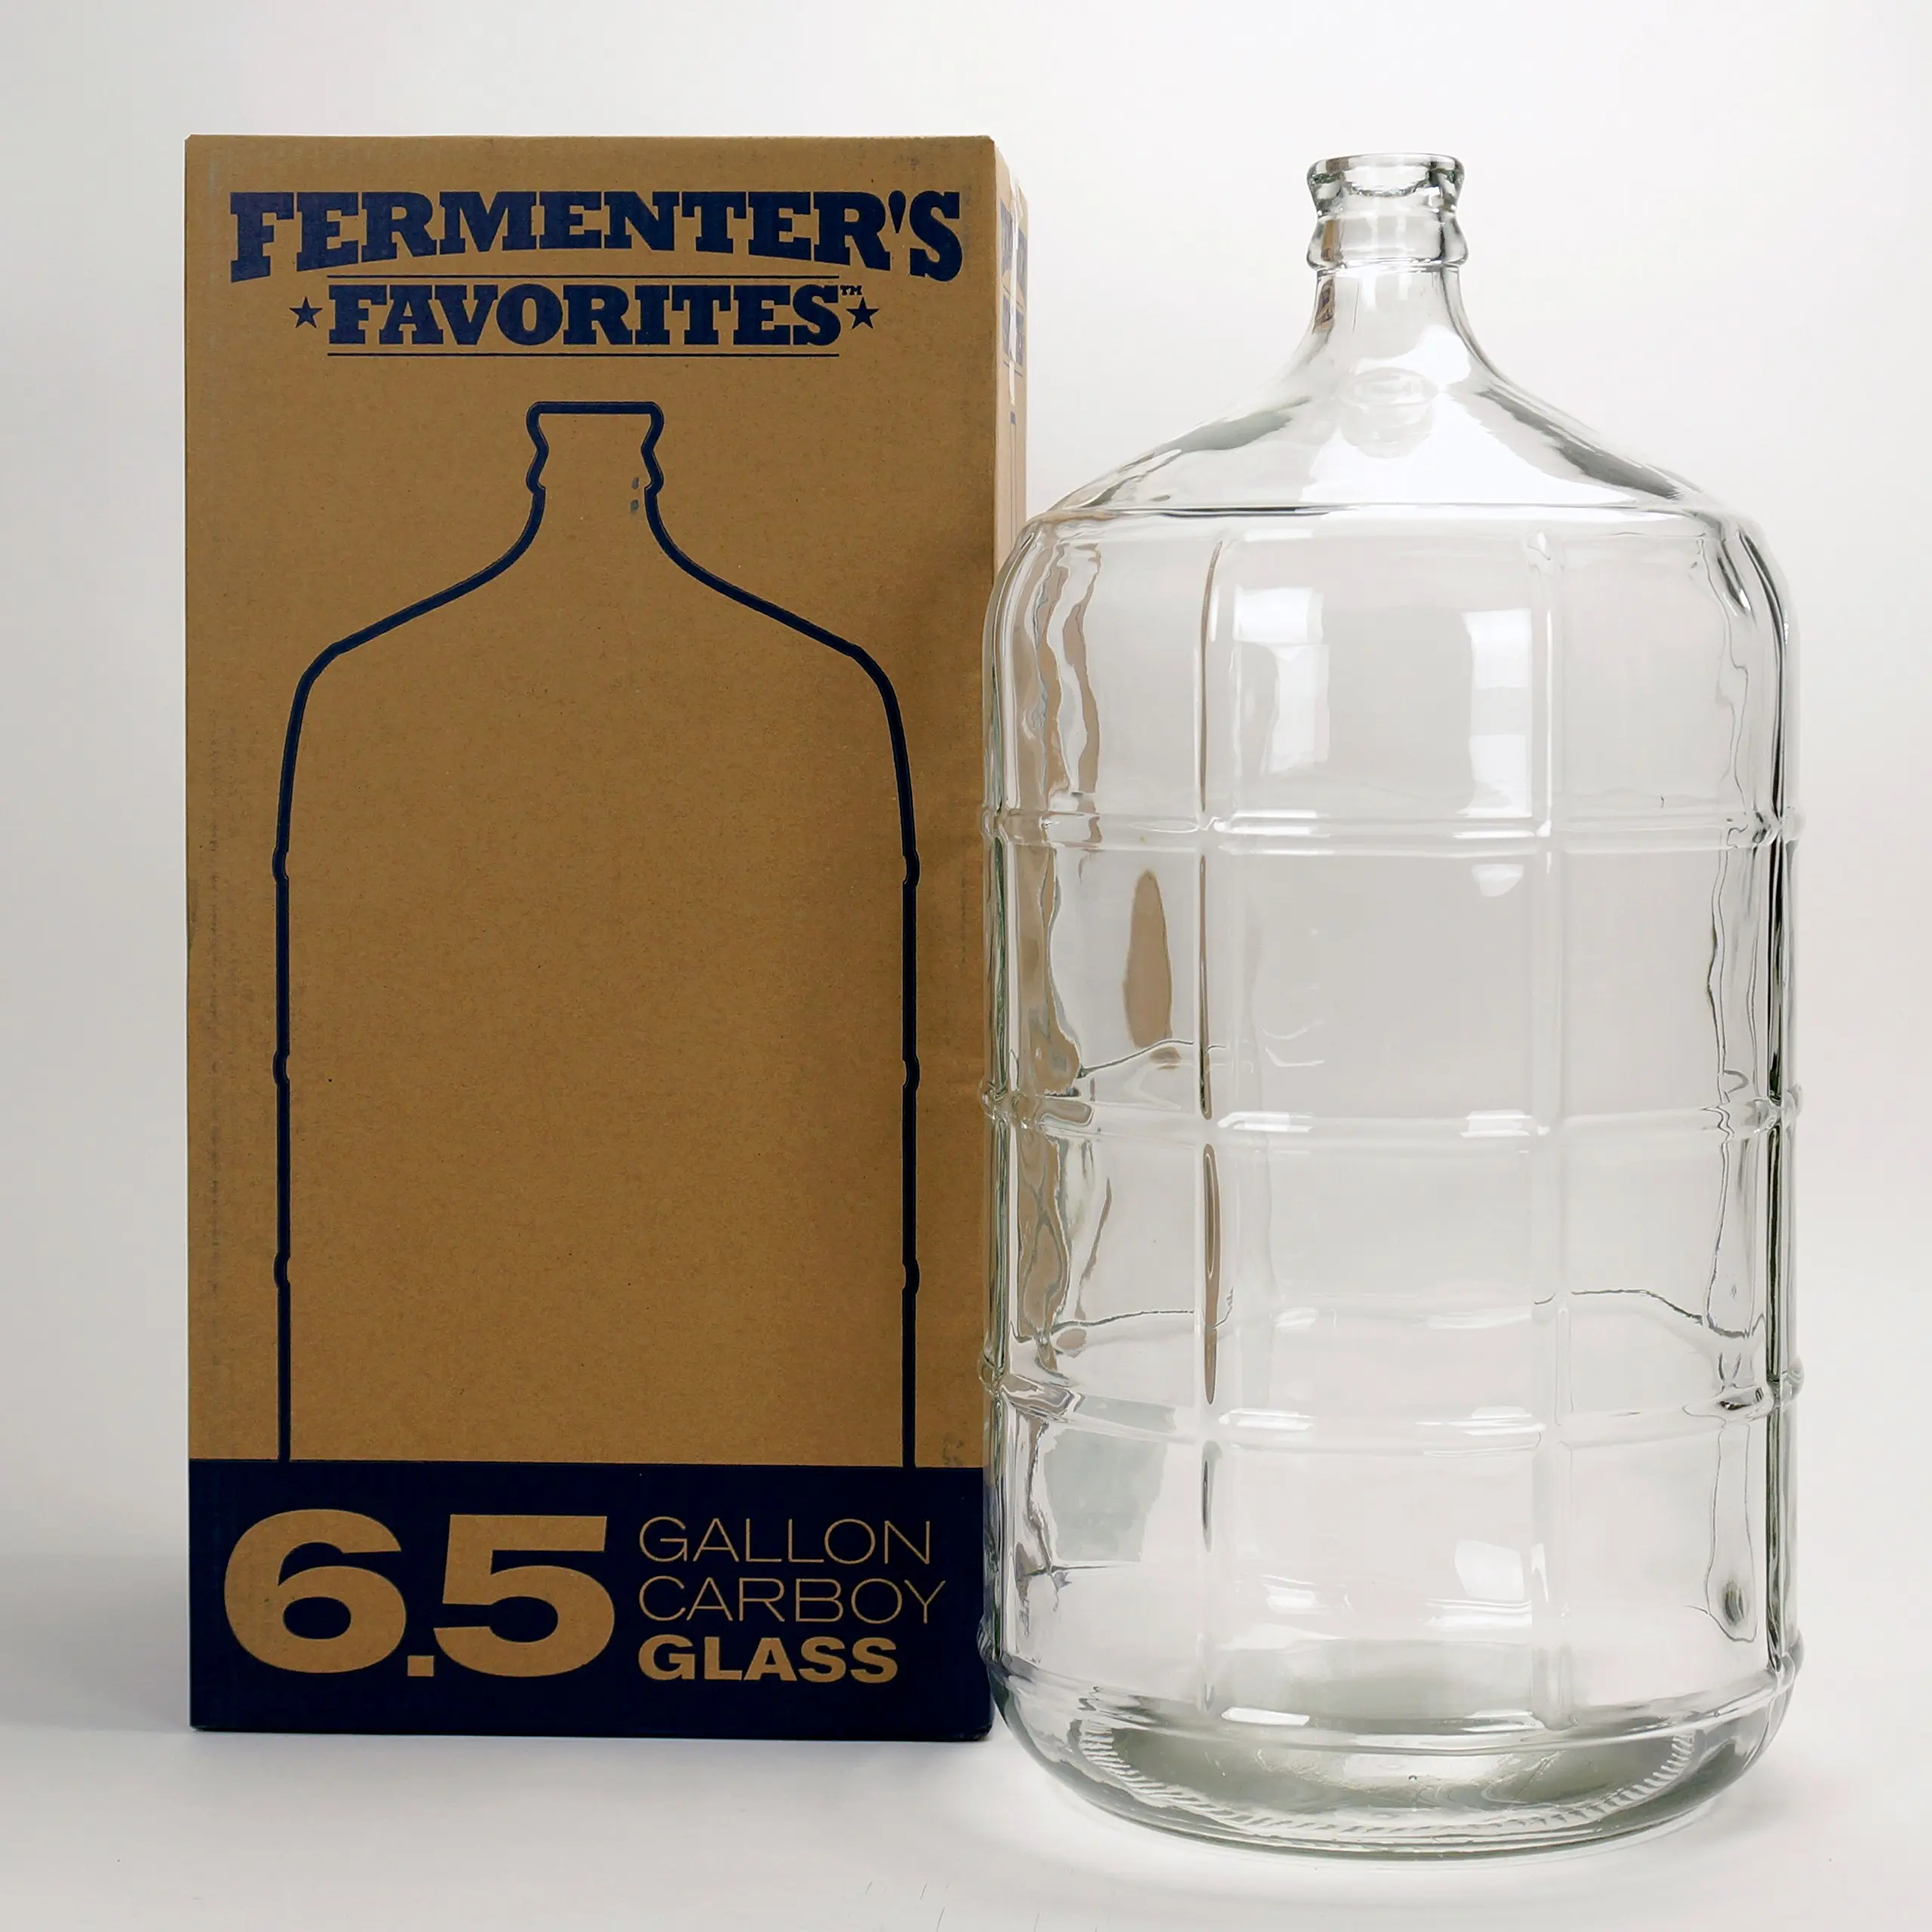 Glass Carboy Fermenter for Home Brewing Beer, Wine Making, and Hard Cider -...